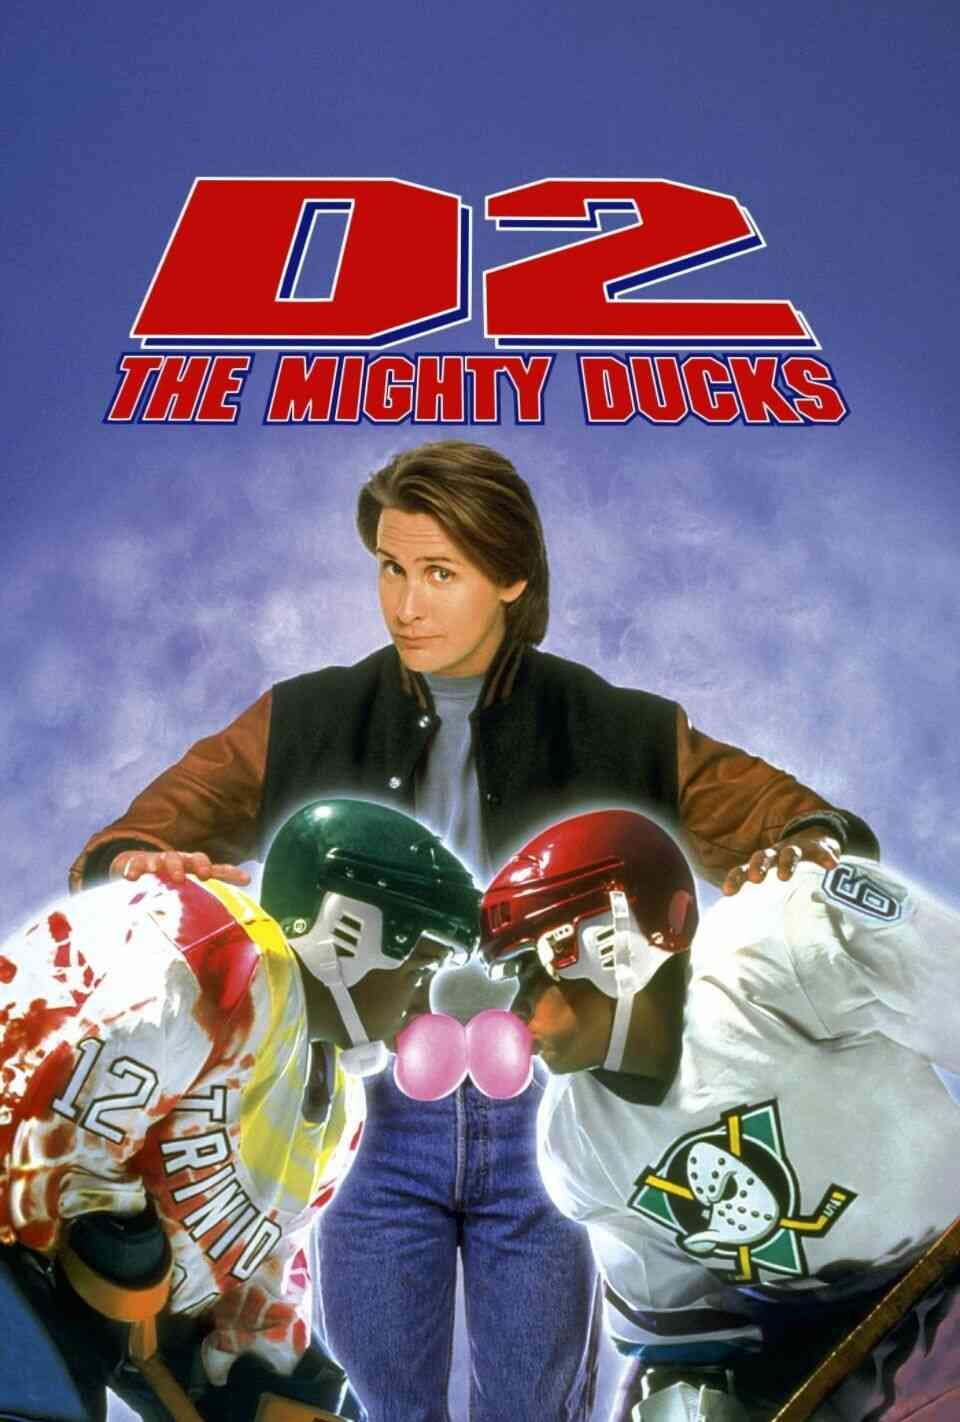 Read The Mighty Ducks screenplay (poster)